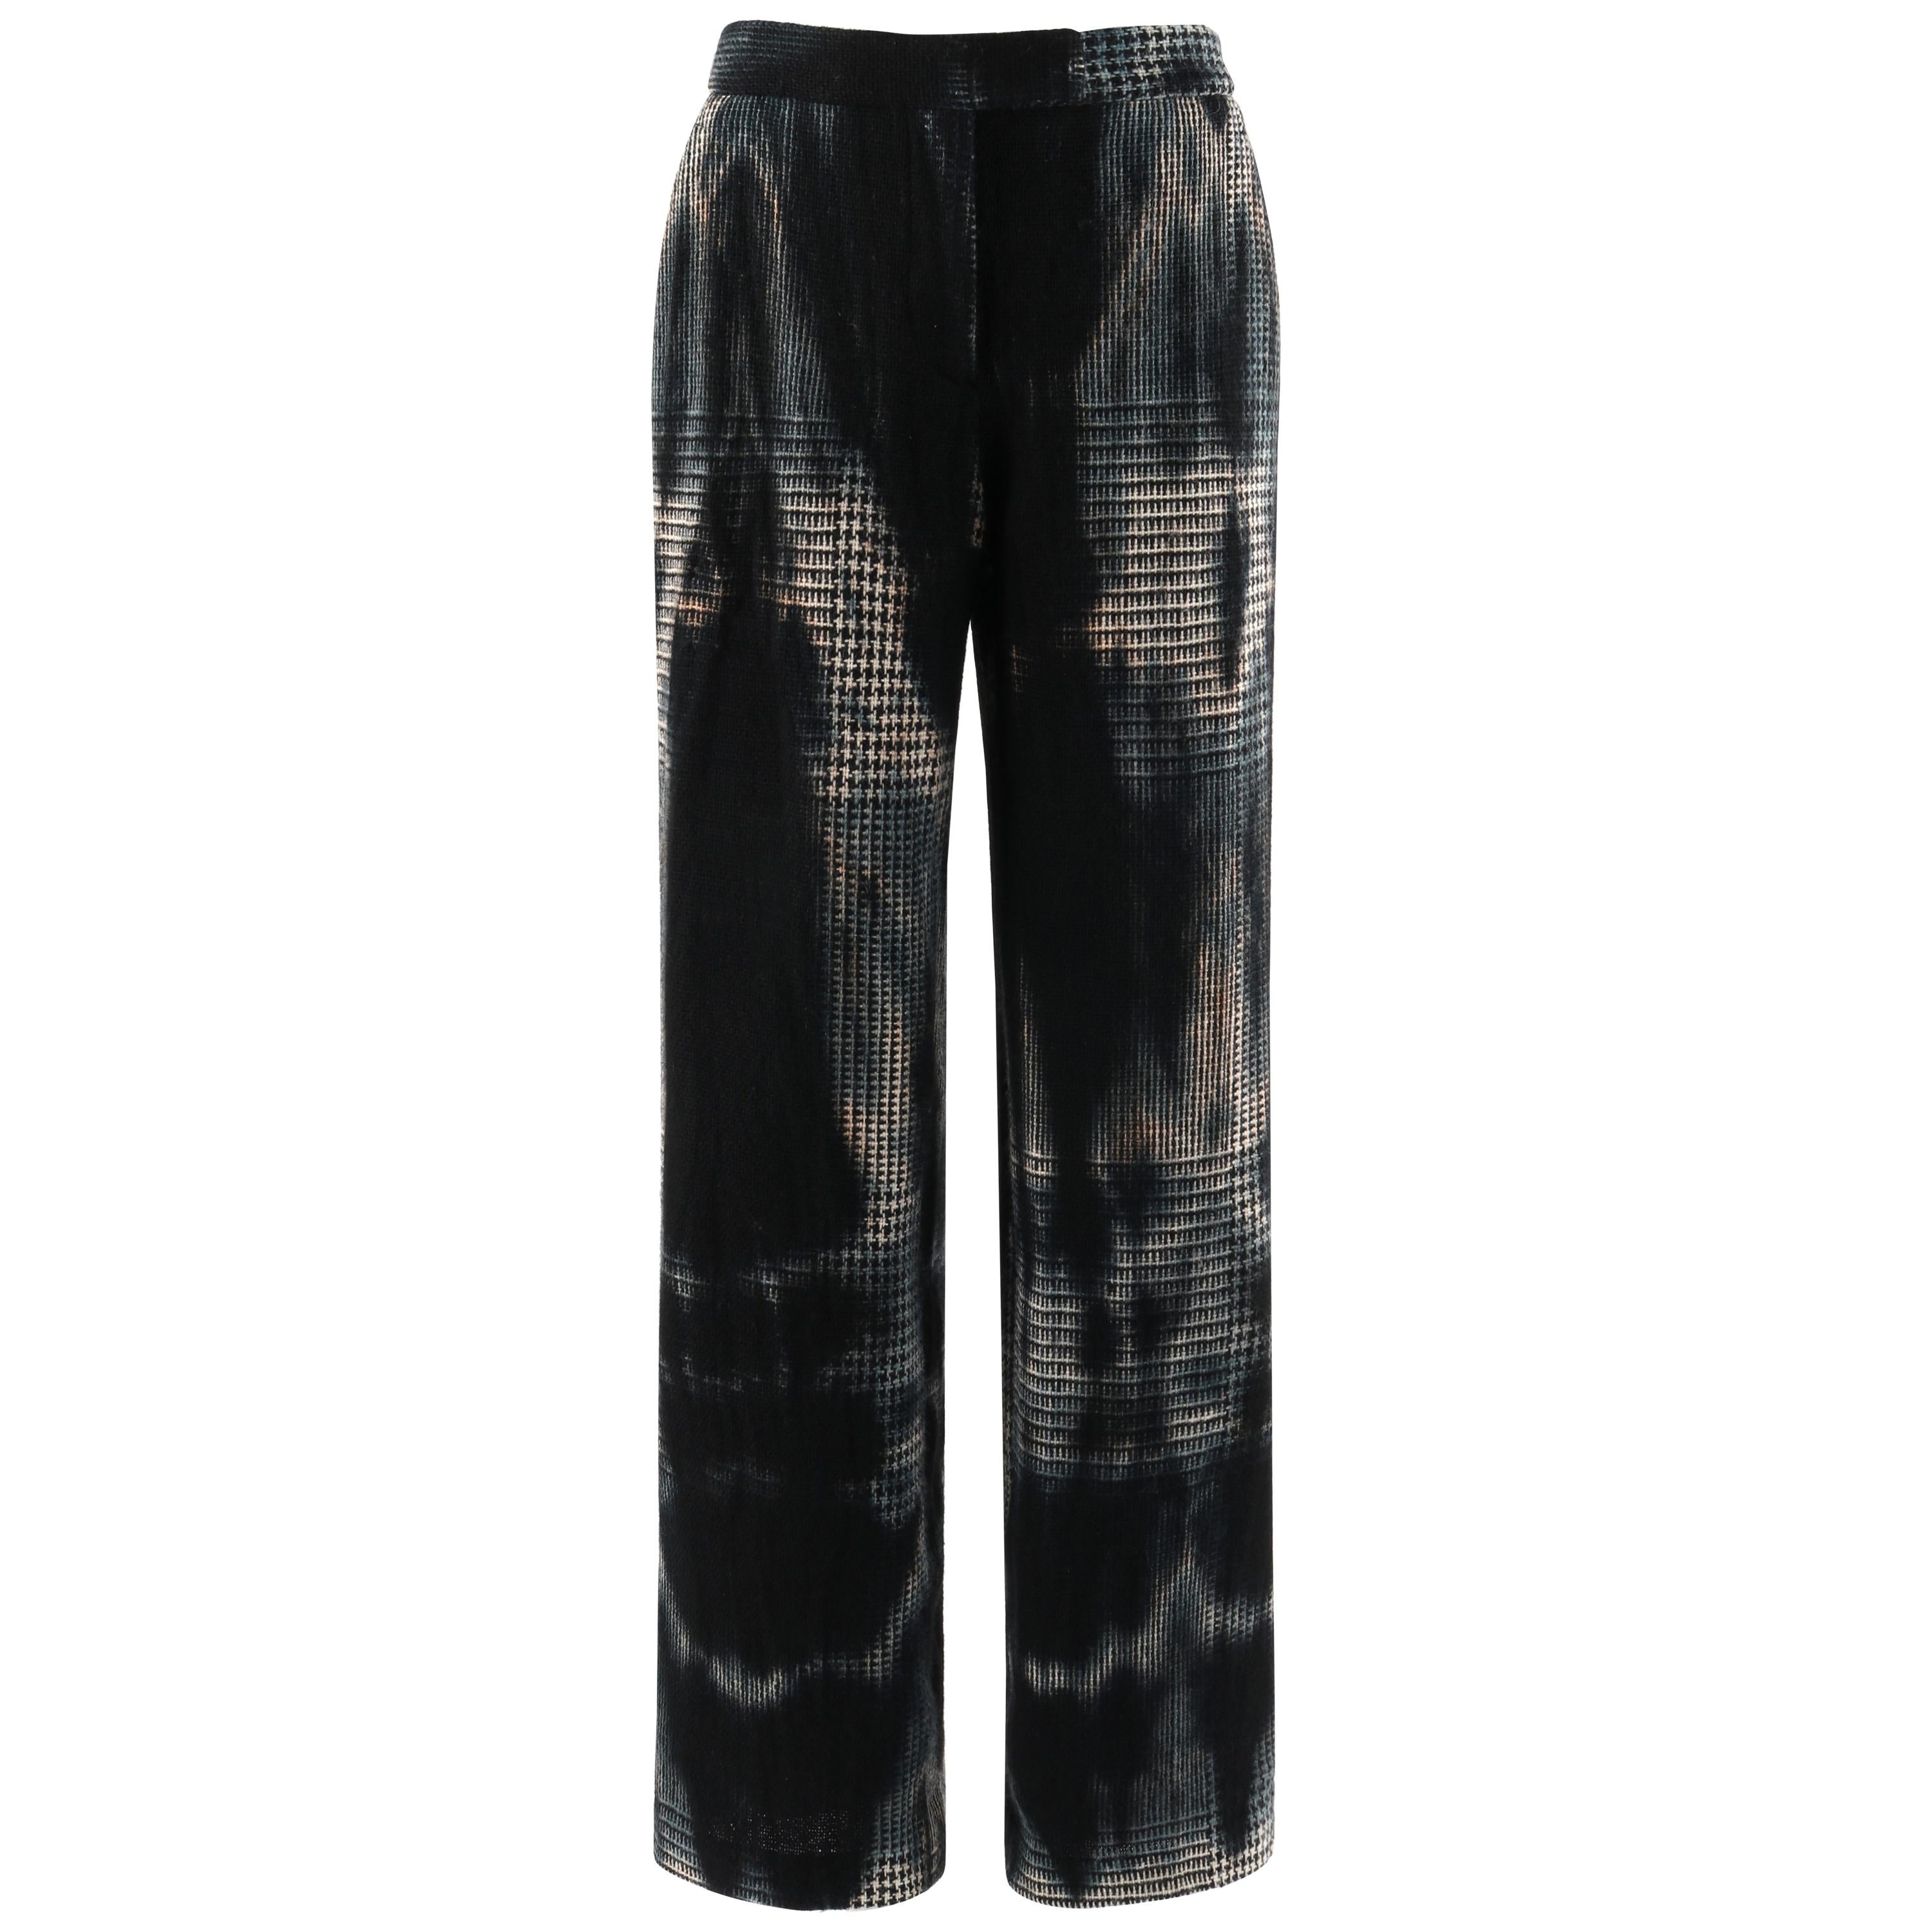 ALEXANDER McQUEEN F/W 2001 "What a Merry-Go-Round" Smoke Houndstooth Knit Pants For Sale